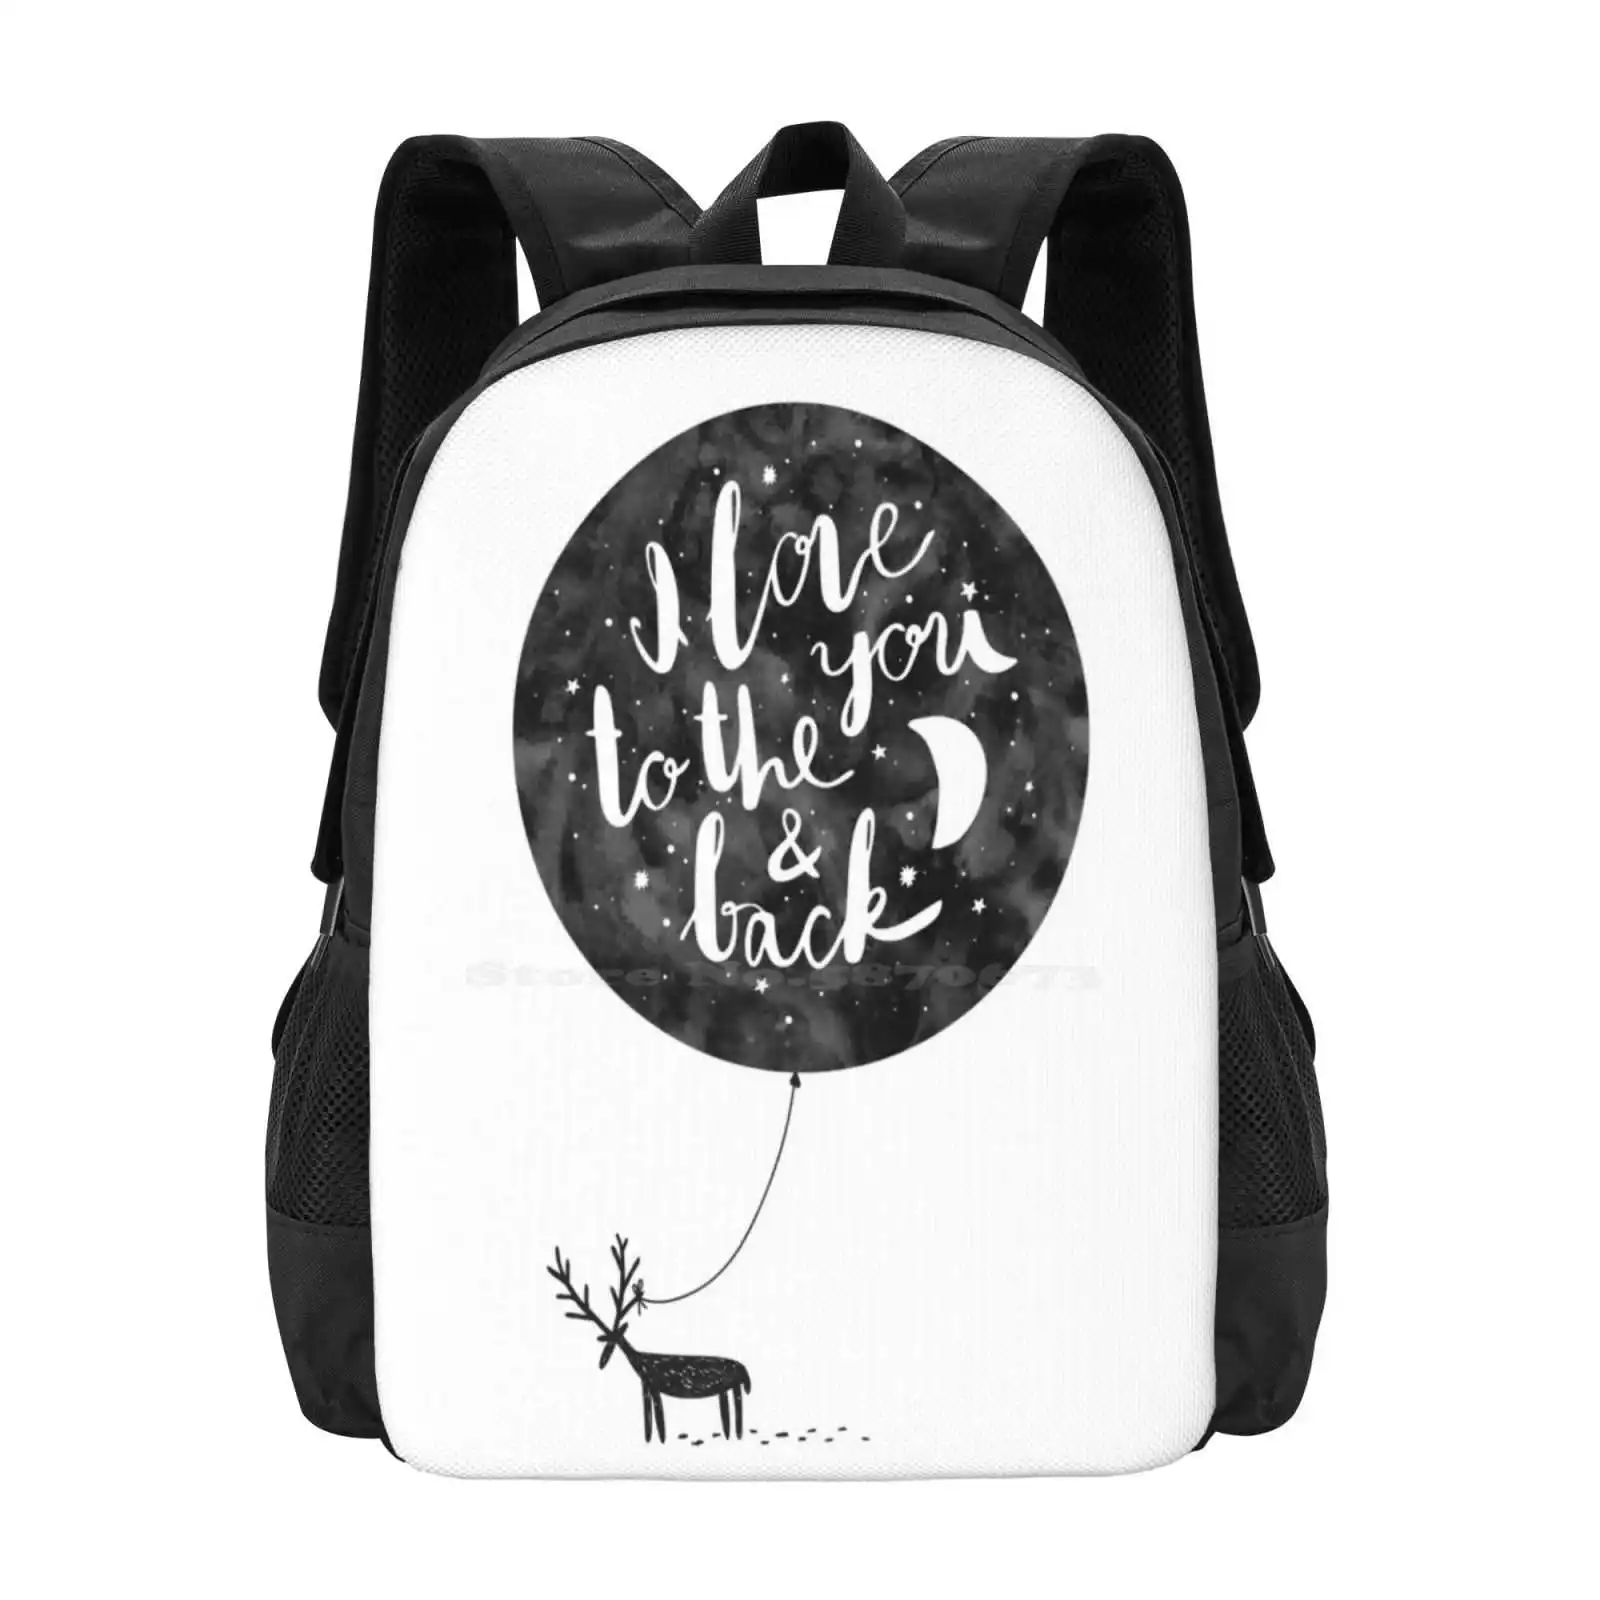 

Hand Drawn Cute Illustration With A Deer , Ballon And Text School Bags Travel Laptop Backpack Sketch Floral Day Vector Unique